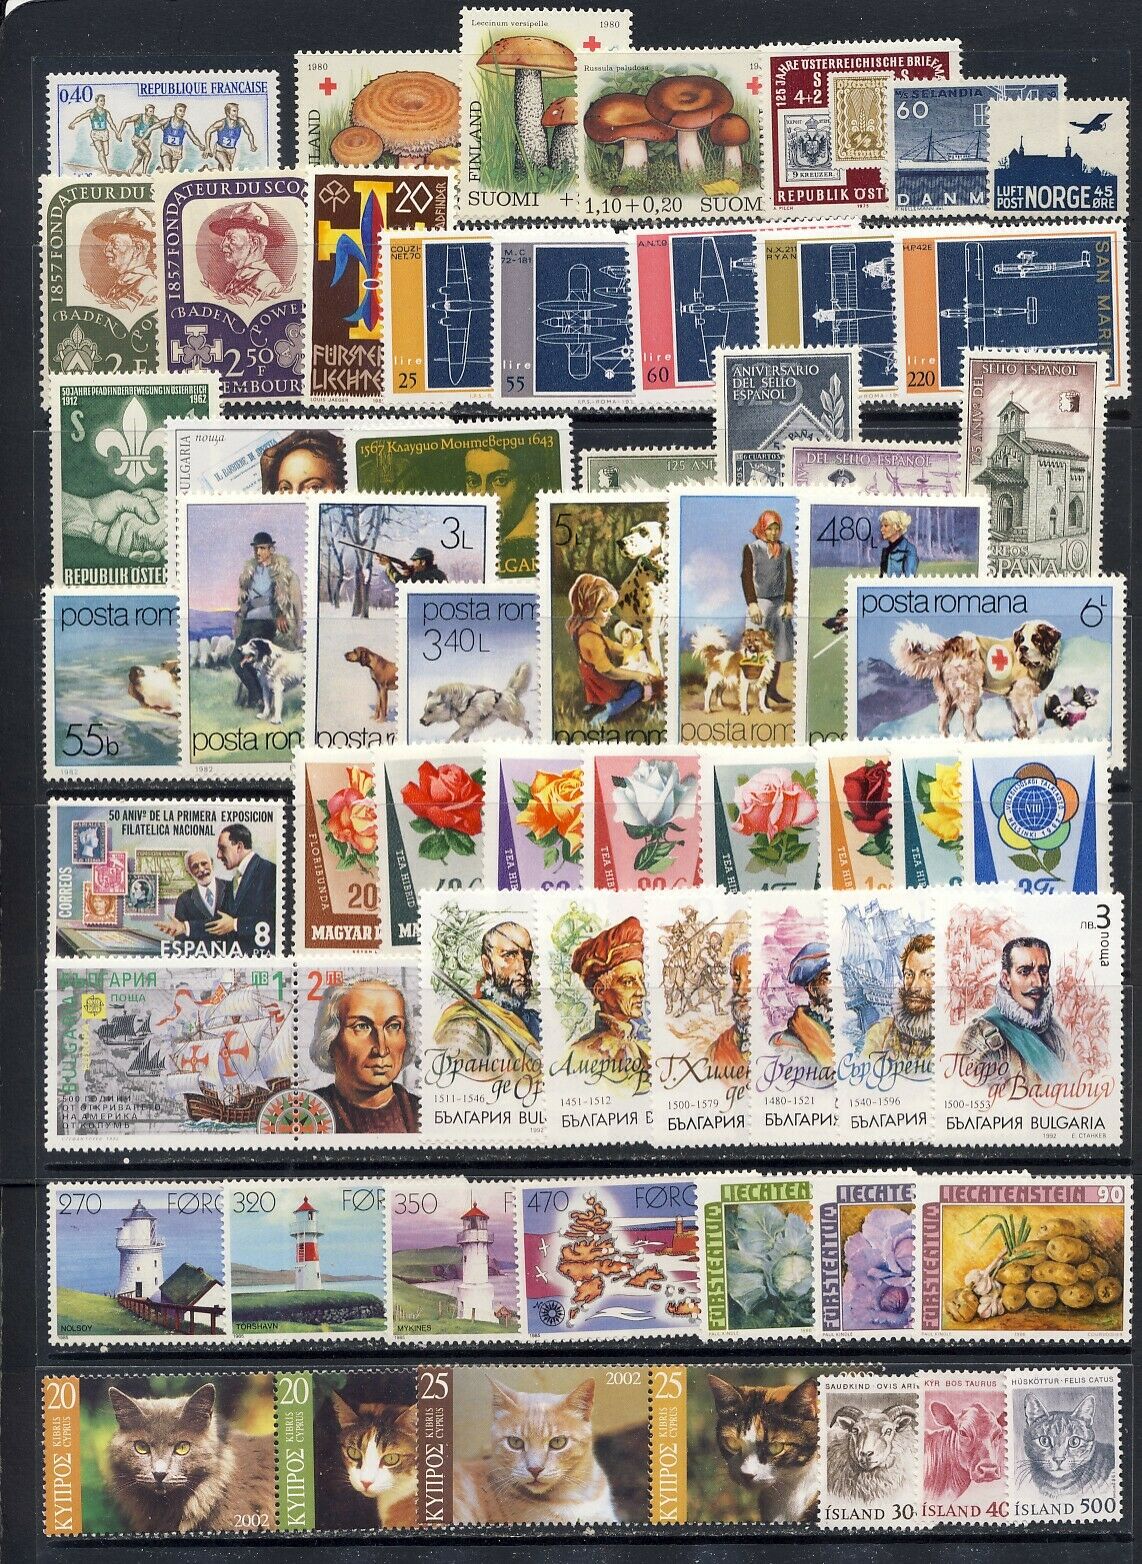 Europe Topical Stamp Collection Mnh Vf Sets And A Sheet On Two Pages